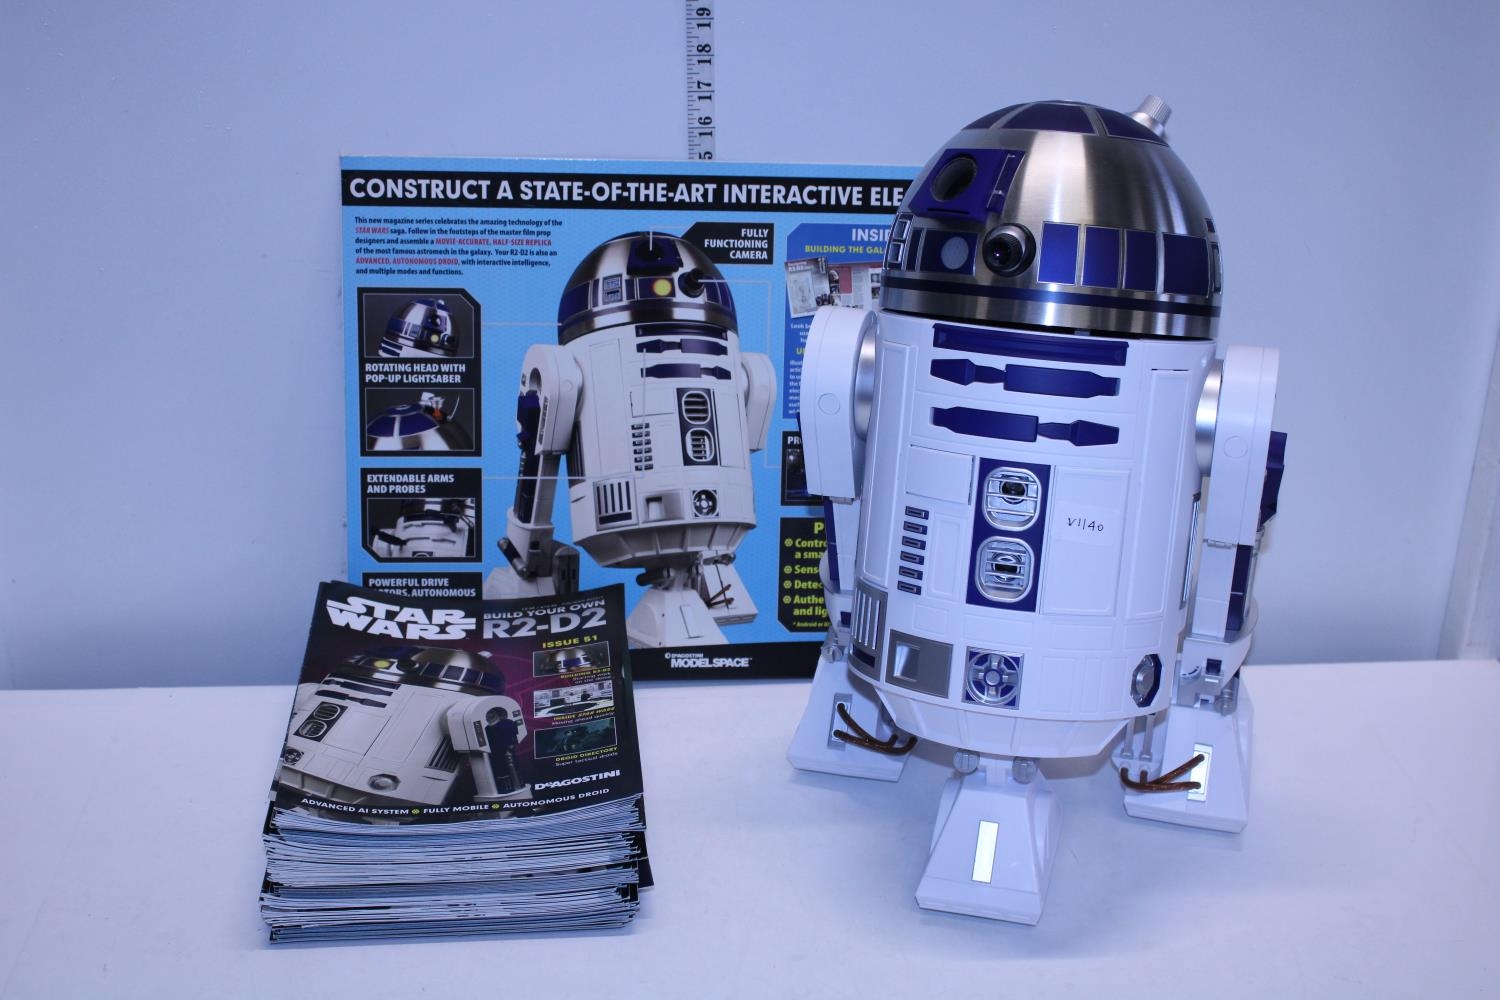 A Deagostini build your own Star Wars R2-D2 complete with magazines